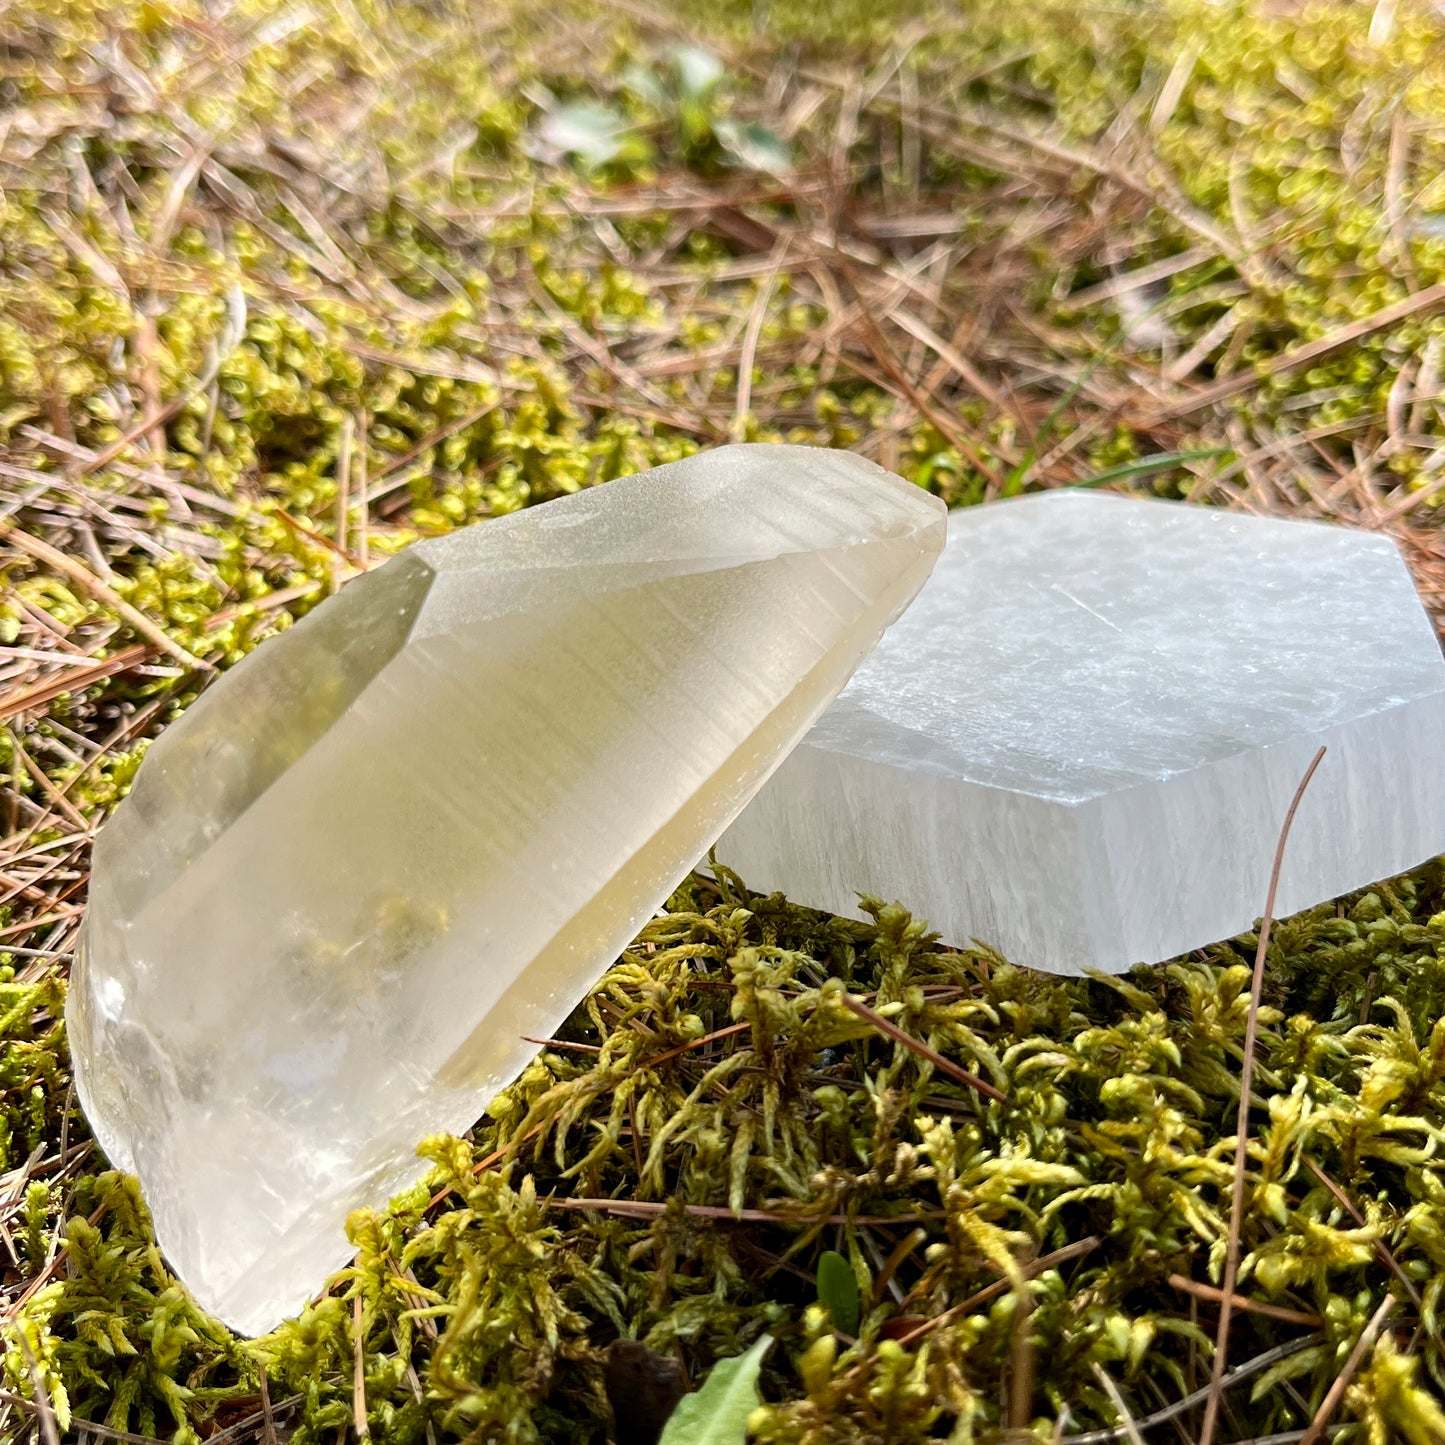 Beautiful Lemurian Brazilian quartz with striations you can feel while holding, meditating, and energizing yourself.